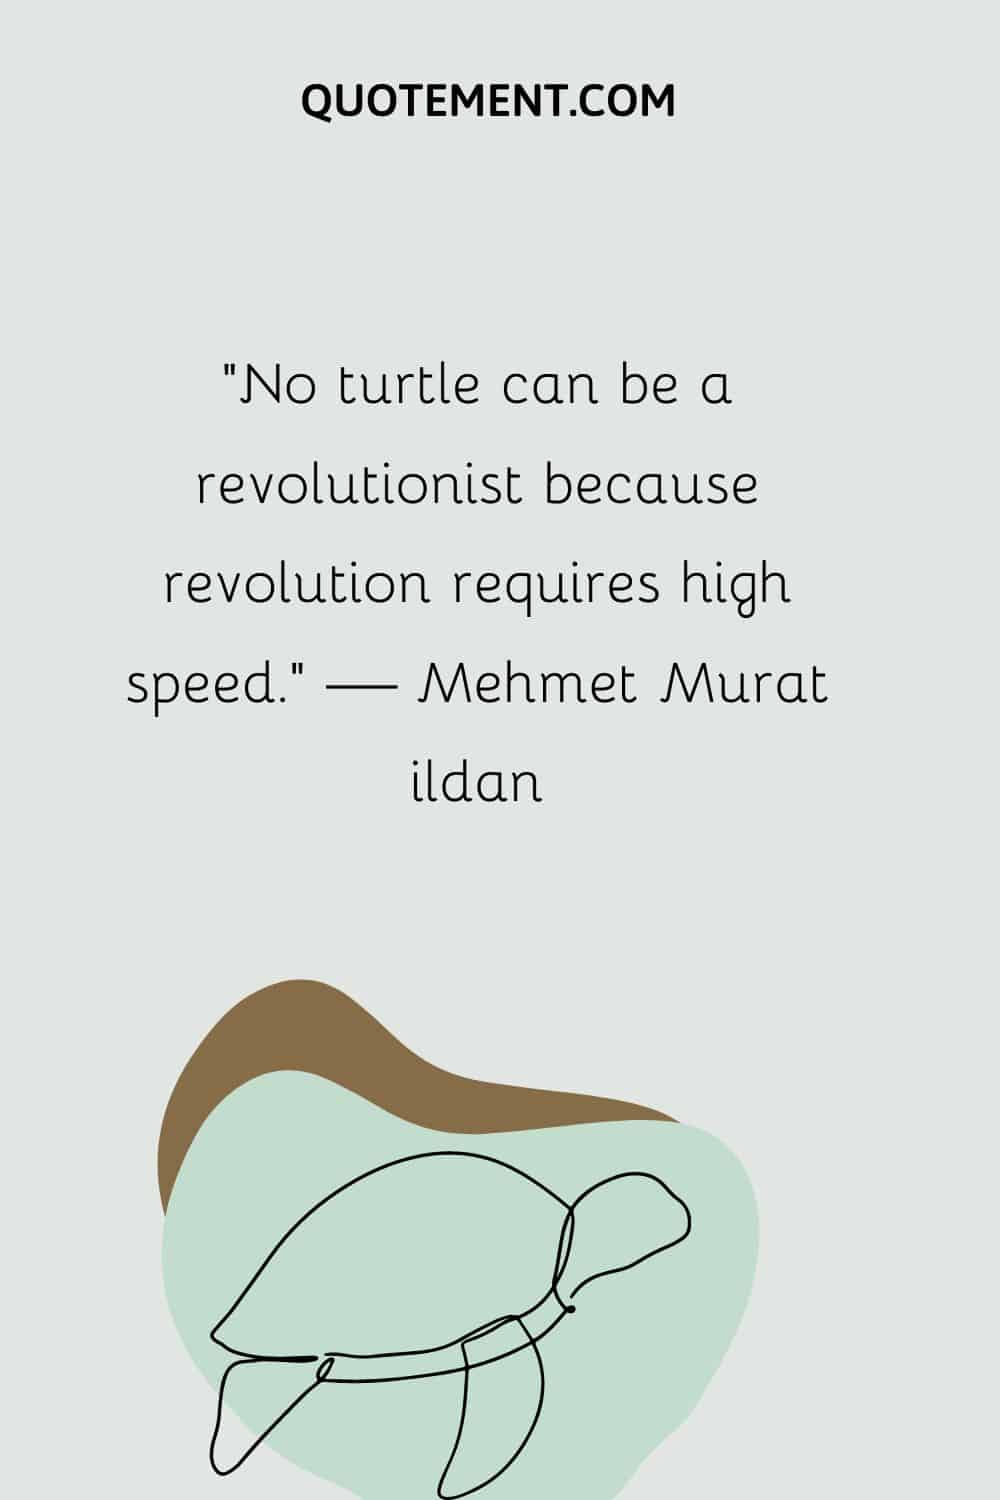 No turtle can be a revolutionist because revolution requires high speed